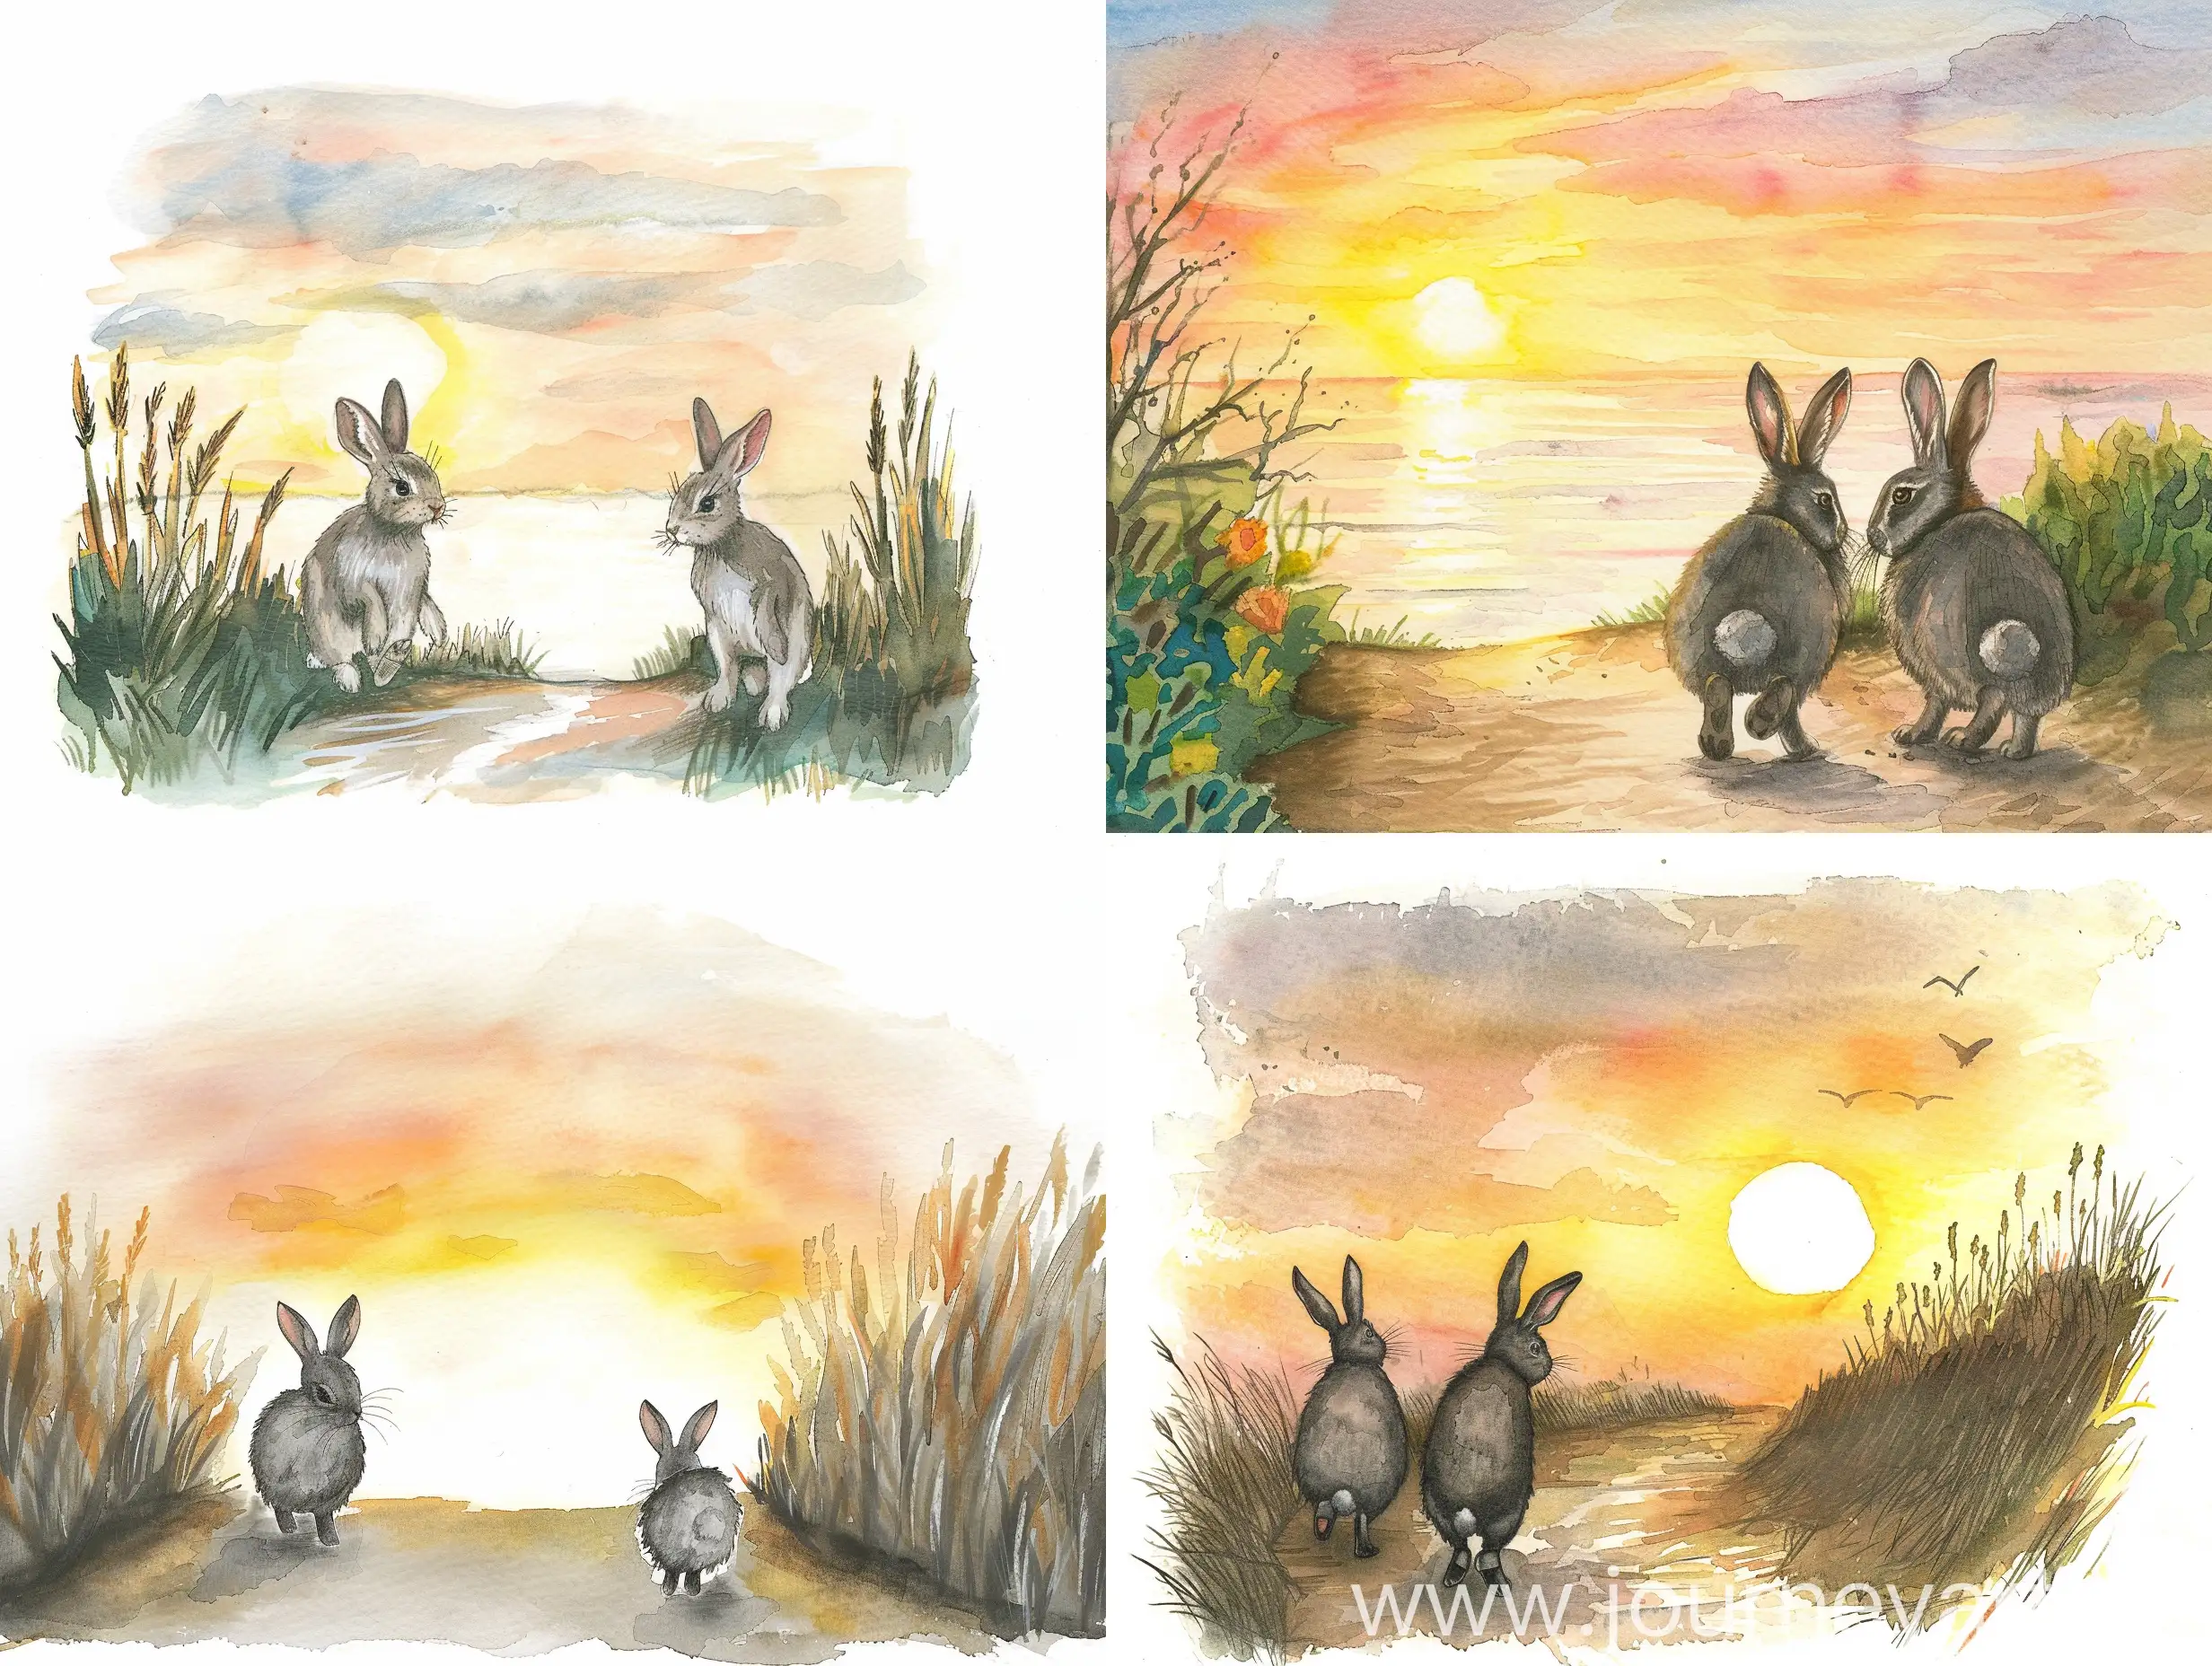 Watercolor drawing of two rabbits walking off into the sunset along a path in the distance